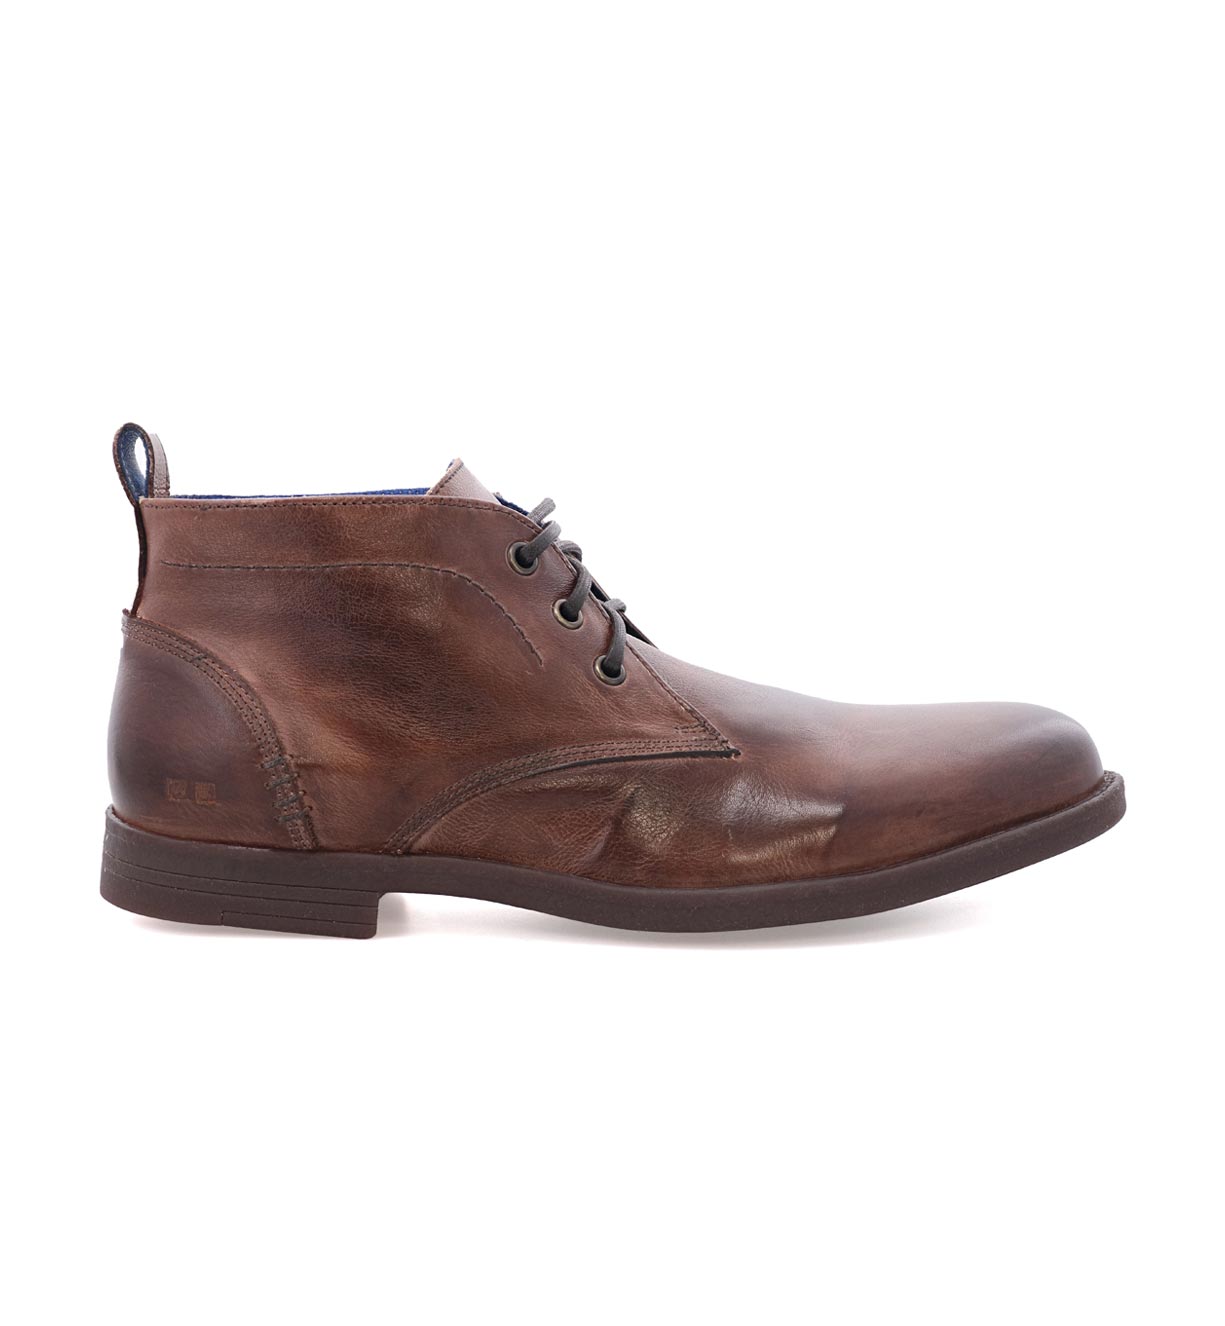 A single Illiad Teak Rustic Boot by Bed Stu, a vegetable-tanned leather men's boot with laces, on a white background.